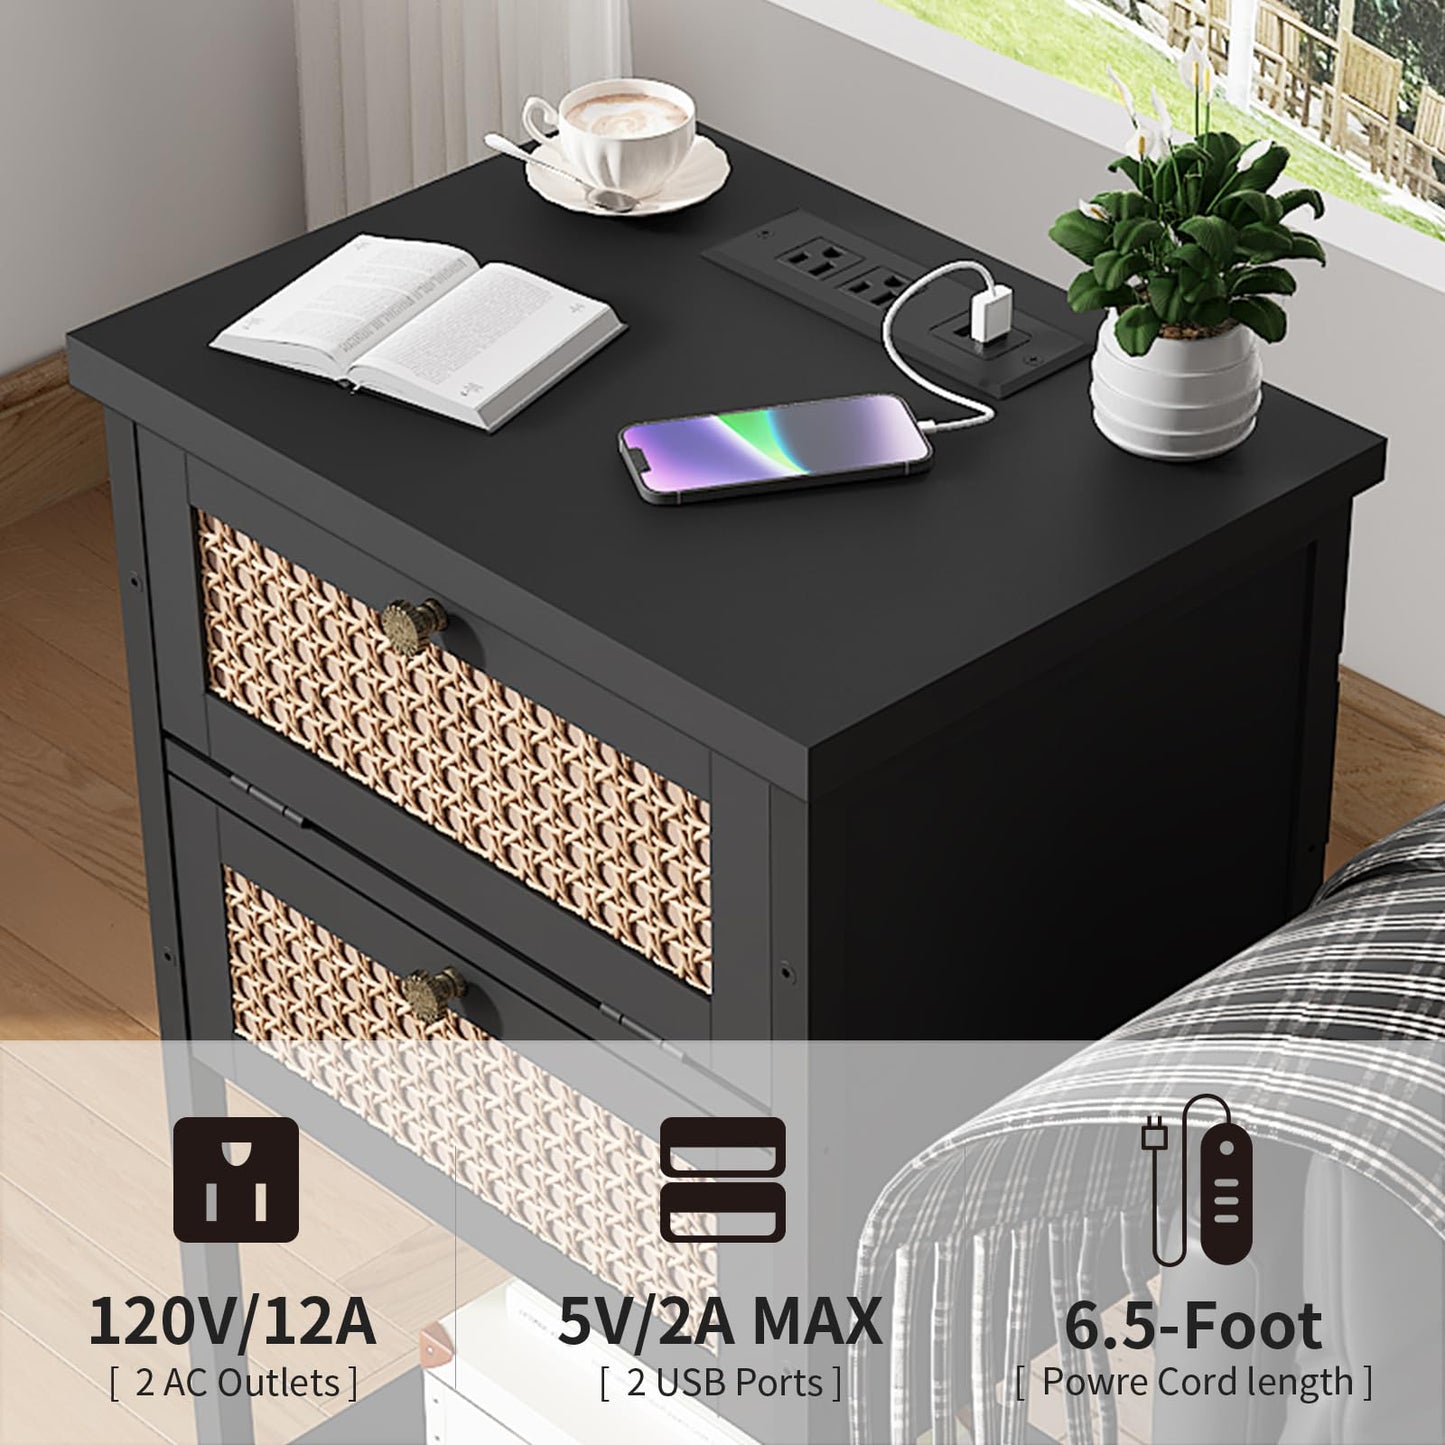 End Table with Charging Station, 2 Tier Rattan Decorated Nightstand with USB Ports and Outlets, Bedside Table with Drawer, Black Modern Sofa Side Table for Bedroom, Living Room, Office